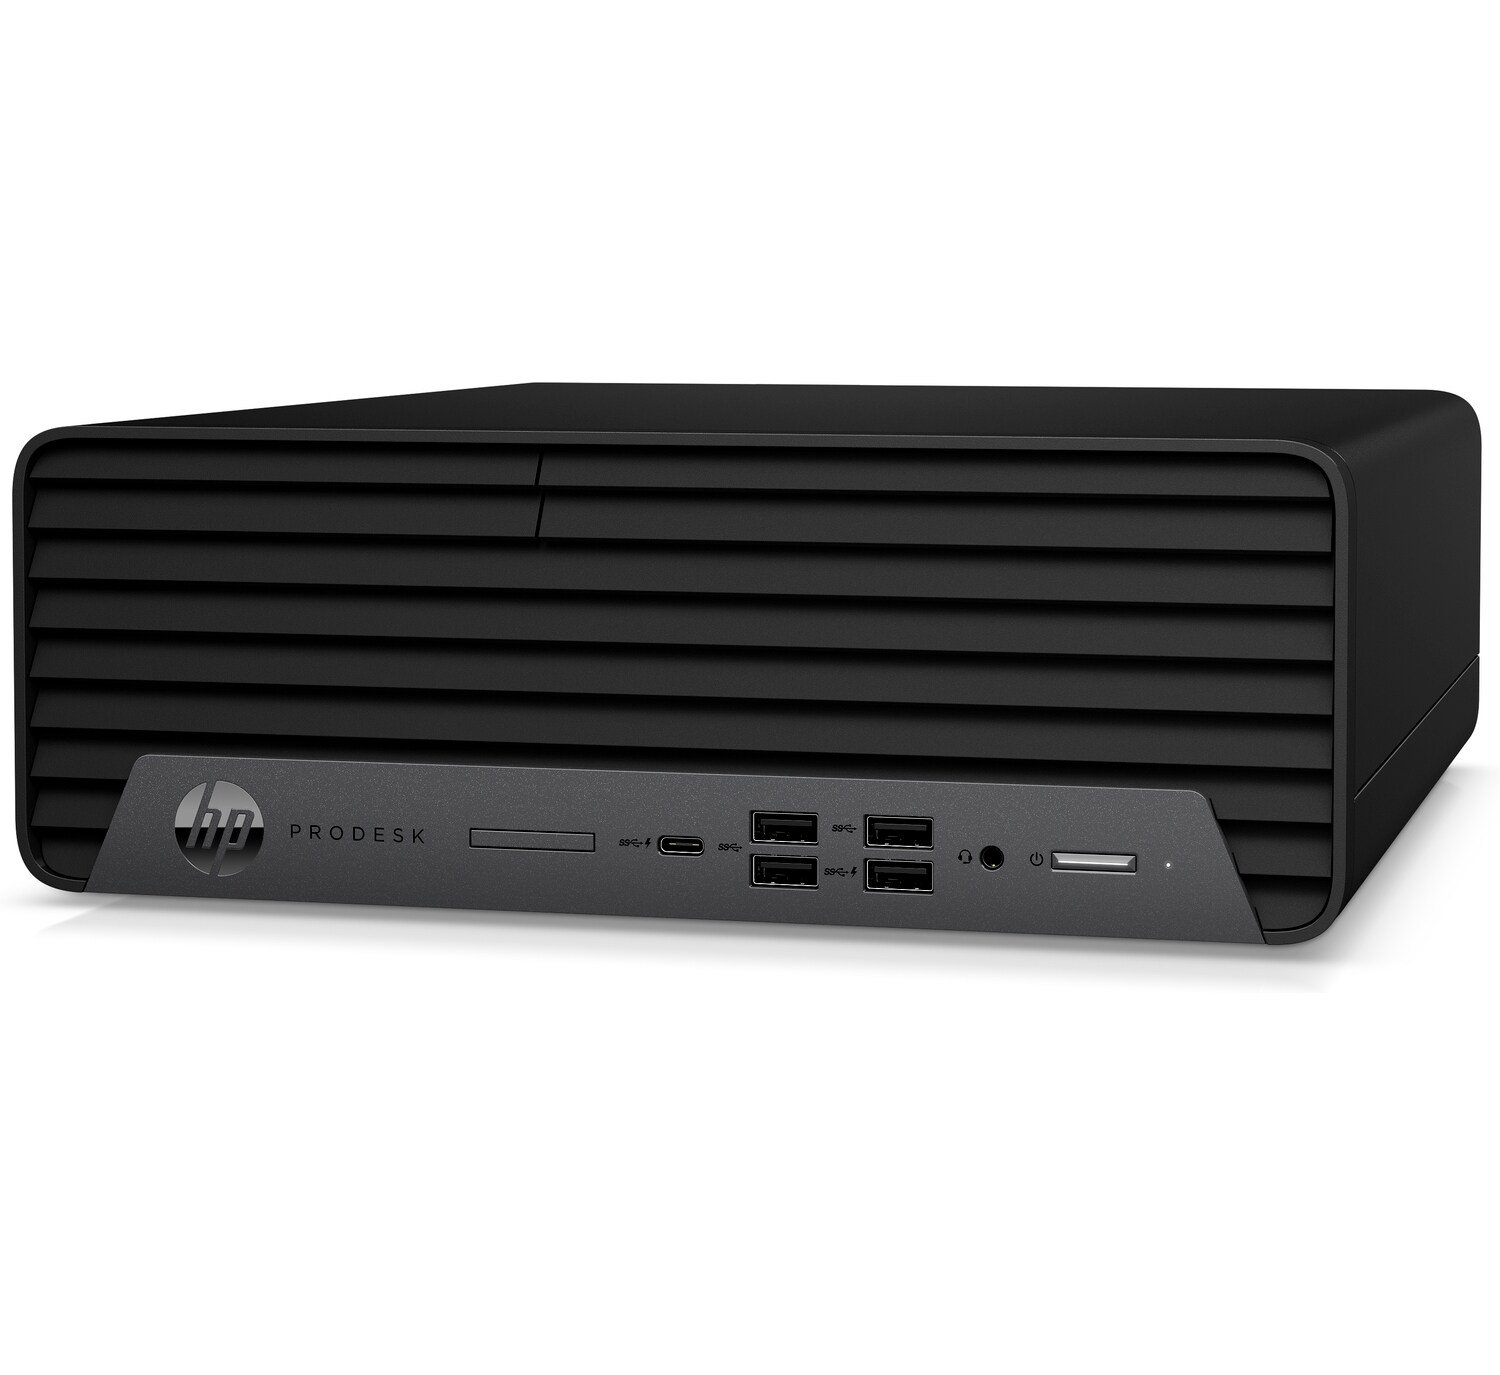 HP ProDesk 600 G6 SFF i5-10500 4.5GHz 8GB RAM 256GB SSD Small Form Factor Desktop with Windows 10 Home